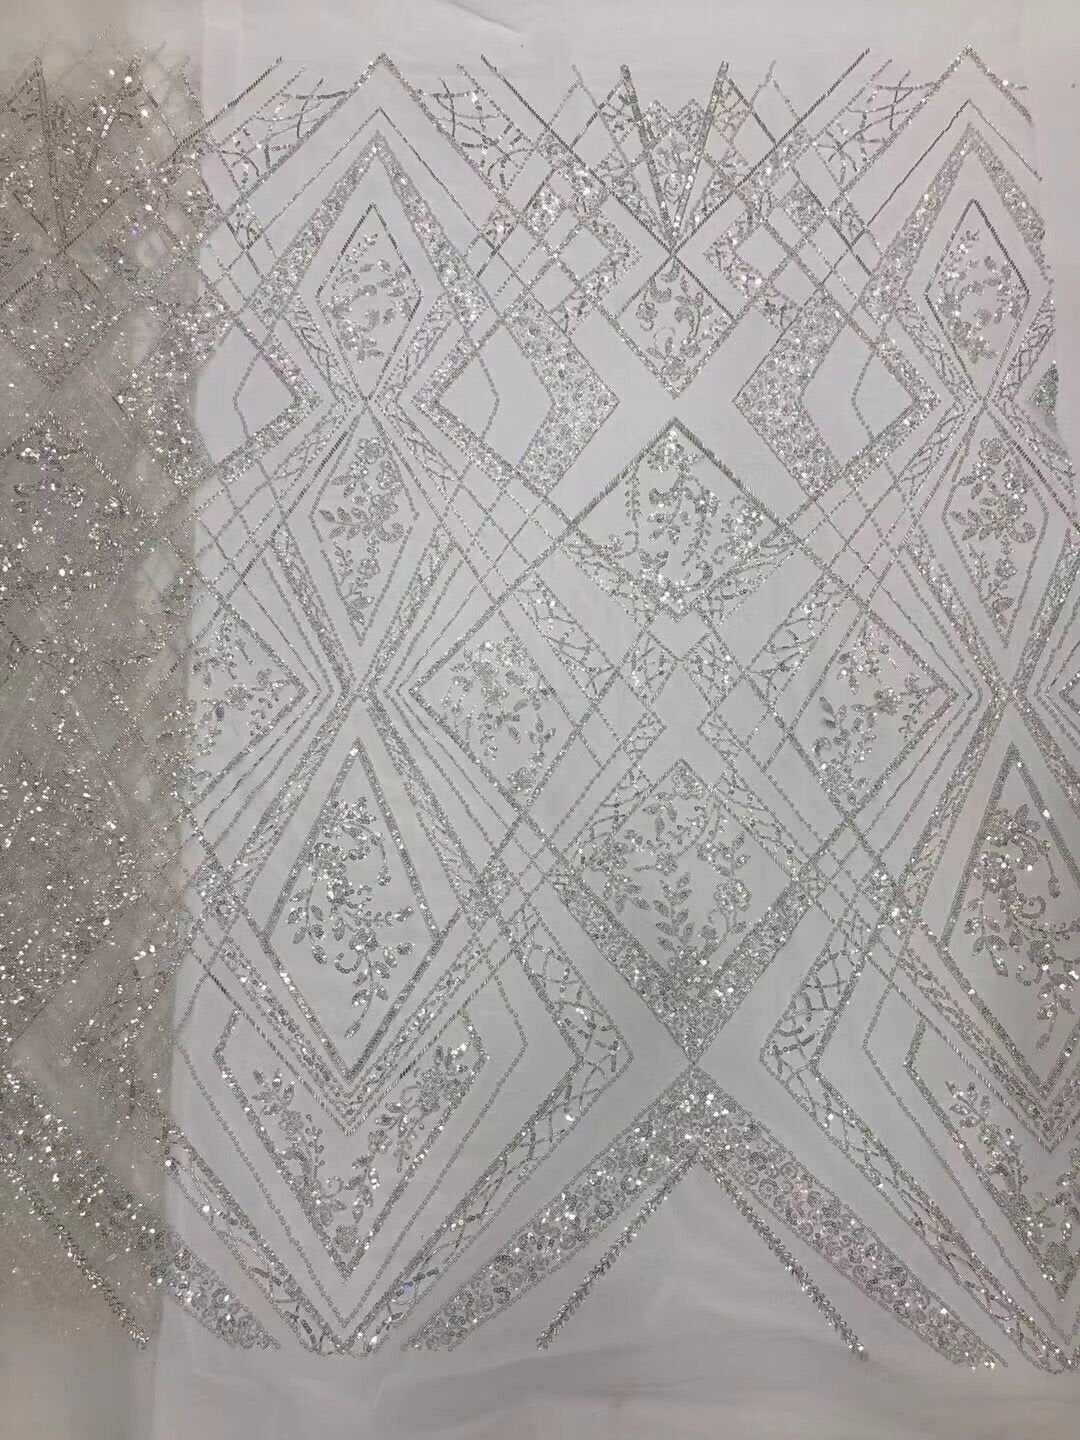 5 YARDS / 5 COLORS / Floral Beaded Embroidery Glitter Mesh Lace Wedding Party Dress Fabric - Classic & Modern